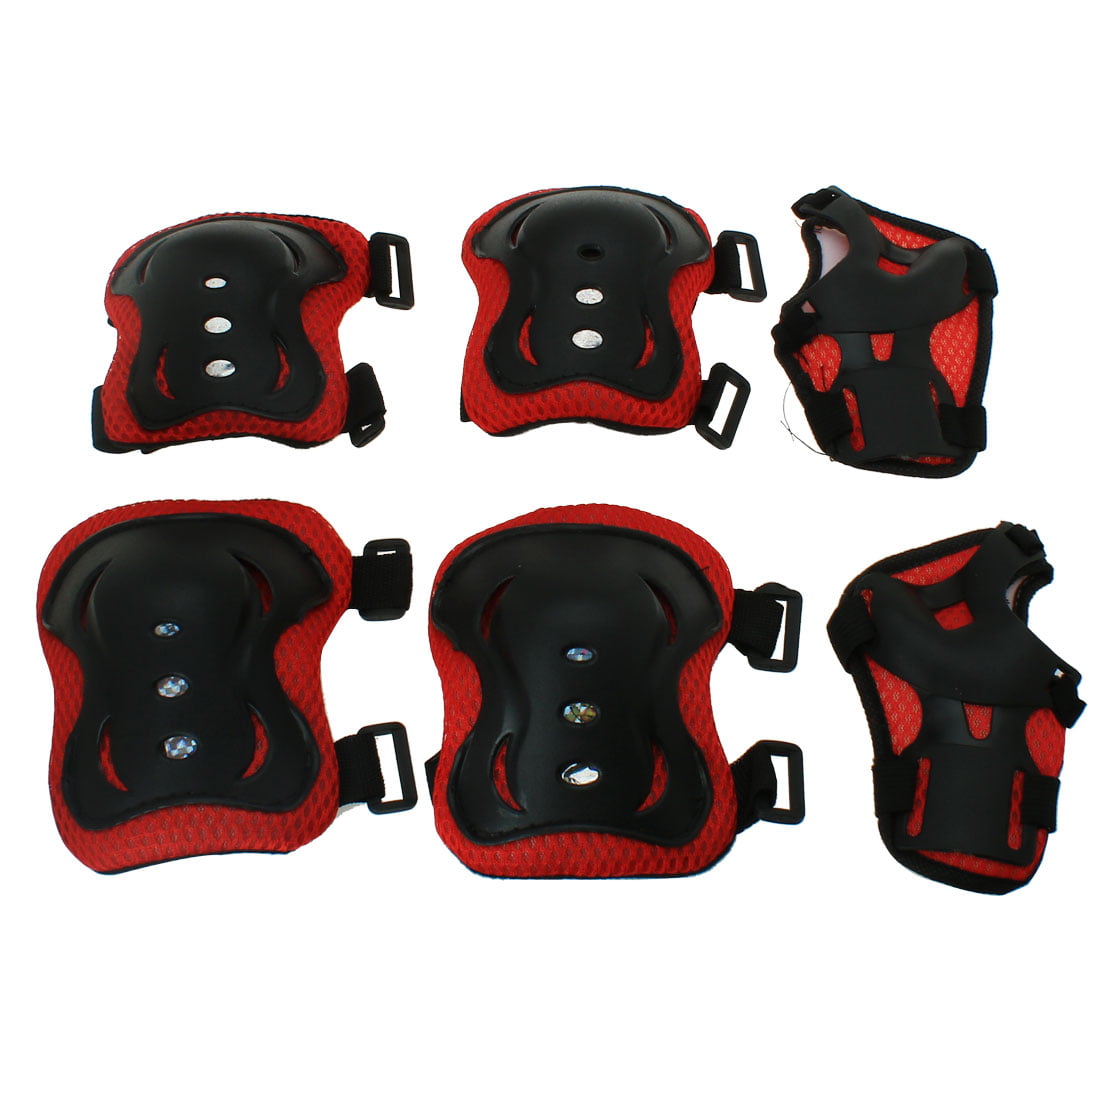 Elbow Wrist Knee Pads Sport Safety Protective Gear Guard for Kids Adult Skate CC 